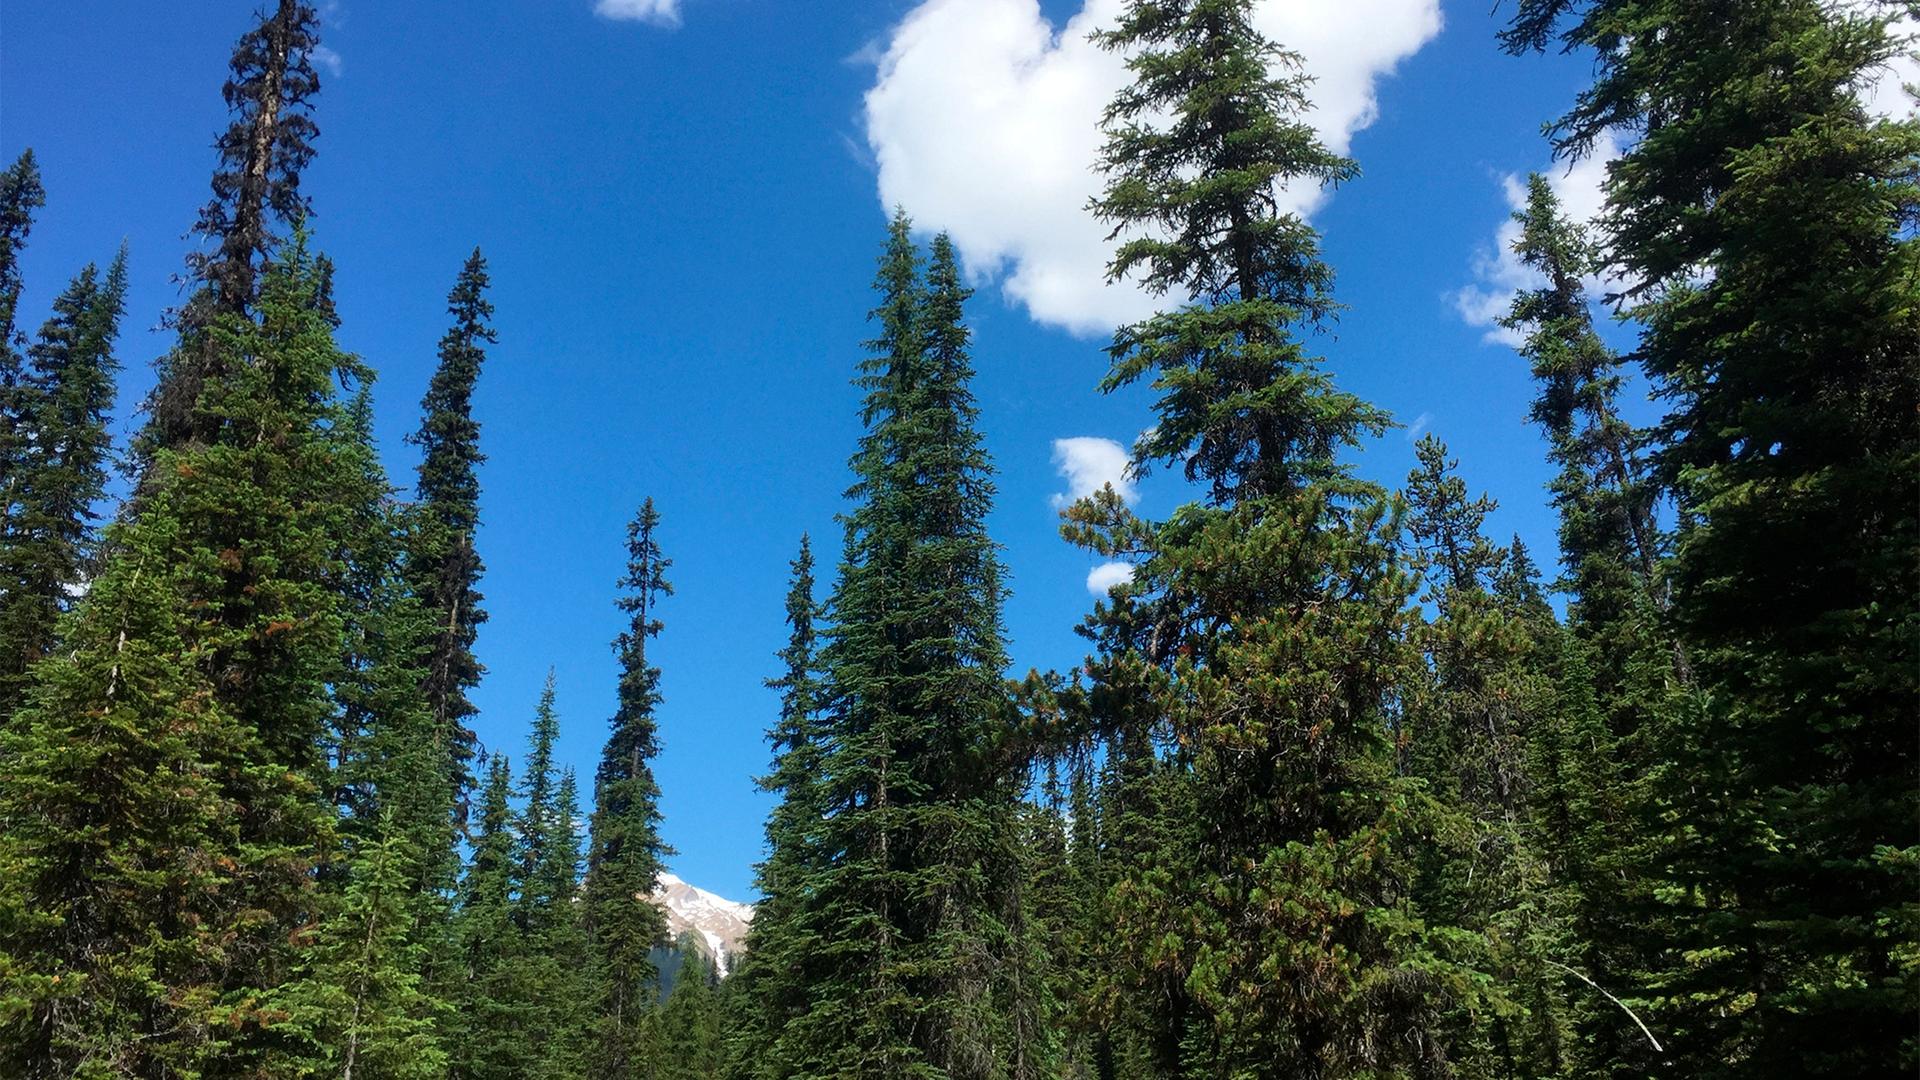 Coniferous trees in Yoho National Park reach toward the sky with snow-topped mountains in the background in Canada's stretch of the Rocky Mountains, straddling the border of British Columbia and Alberta